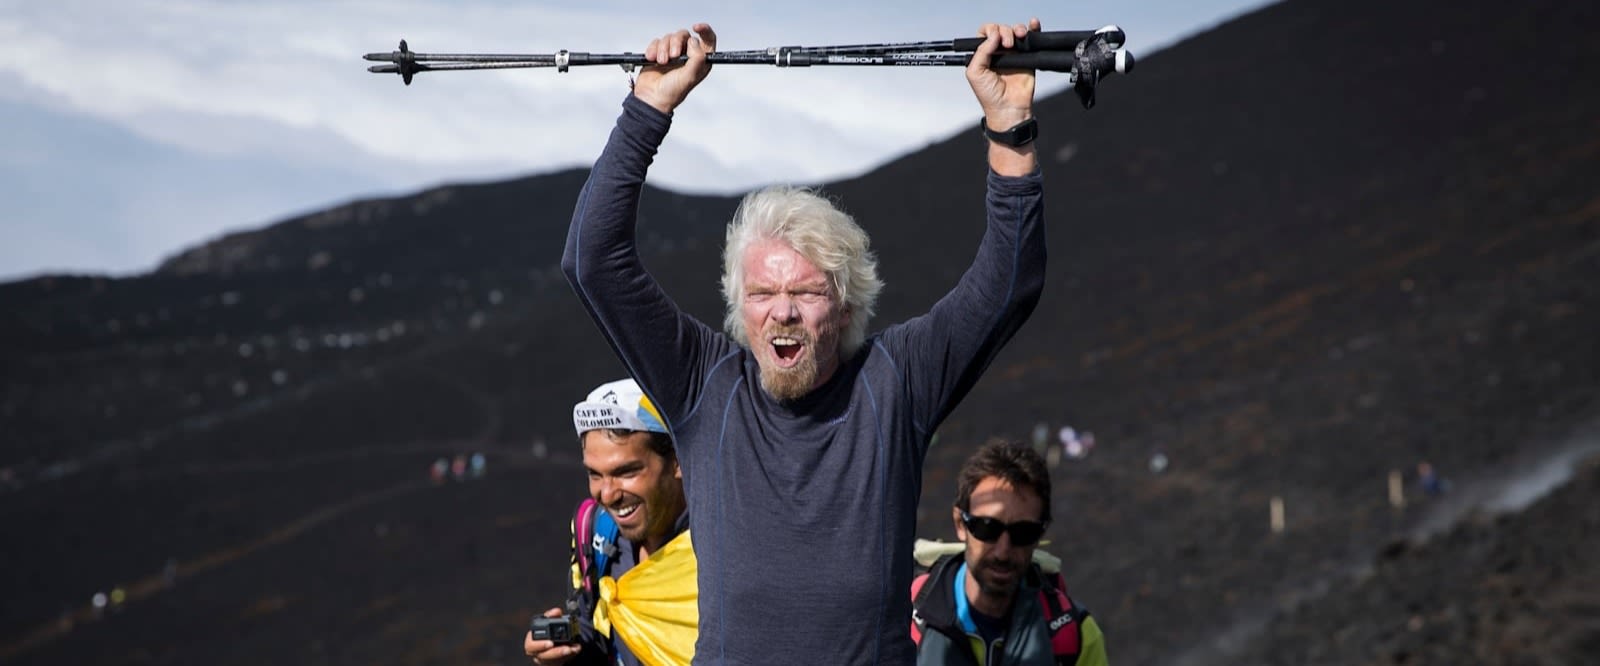 Richard Branson cheering on a hike during the 2016 Strive Challenge